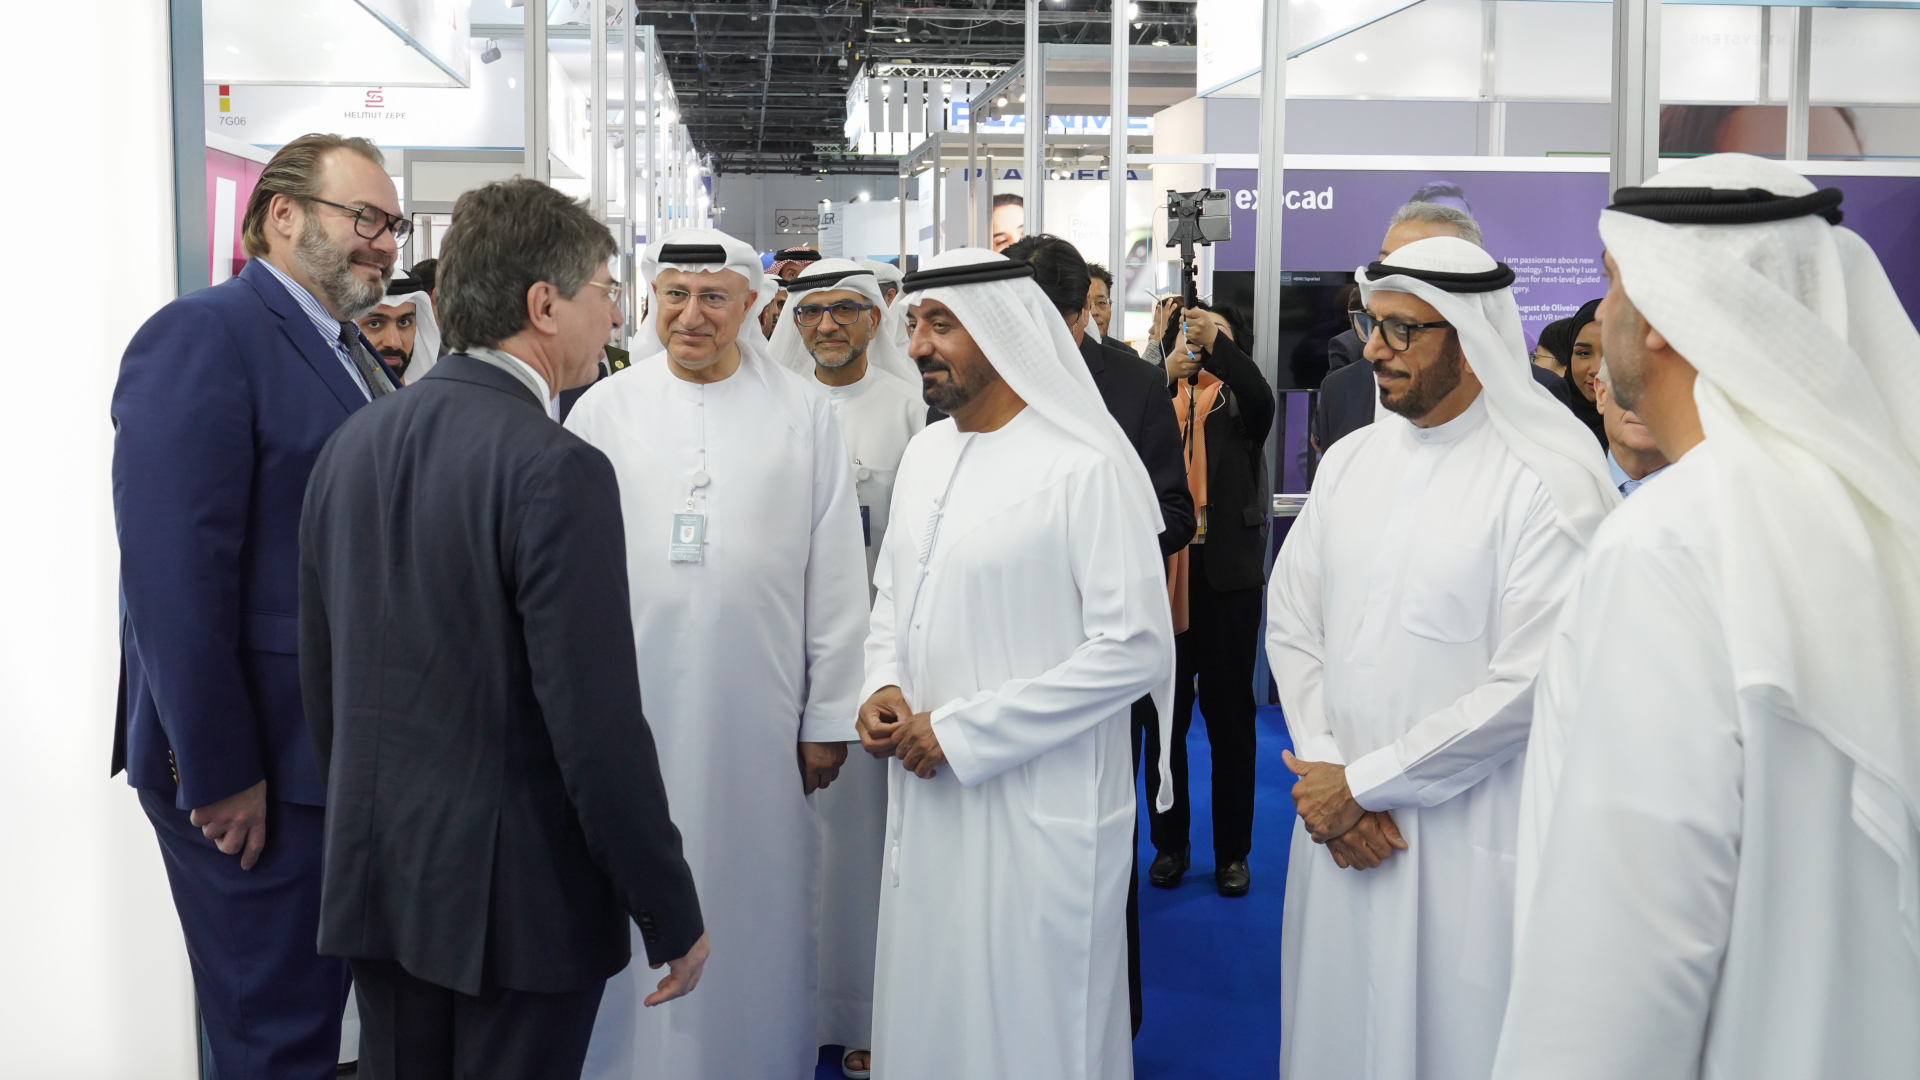 His Highness Sheikh Ahmed bin Saeed Al Maktoum (centre) and his accompanying delegation touring the exhibition halls. (Image: Government of Dubai)